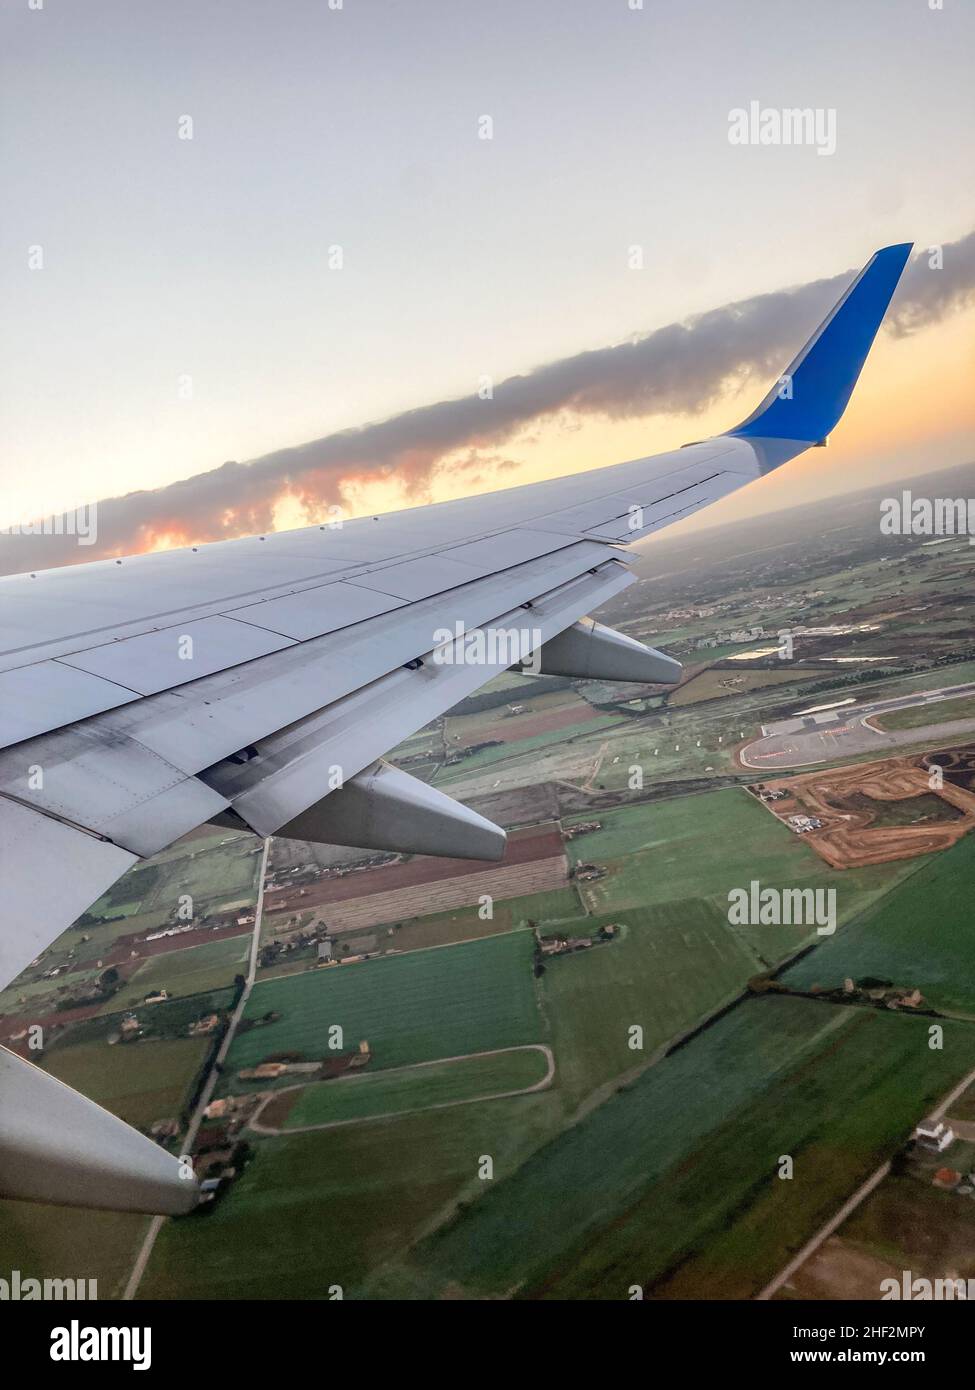 Vertical image of the wing of a commercial aircraft. Picture taken from inside the plane. Stock Photo